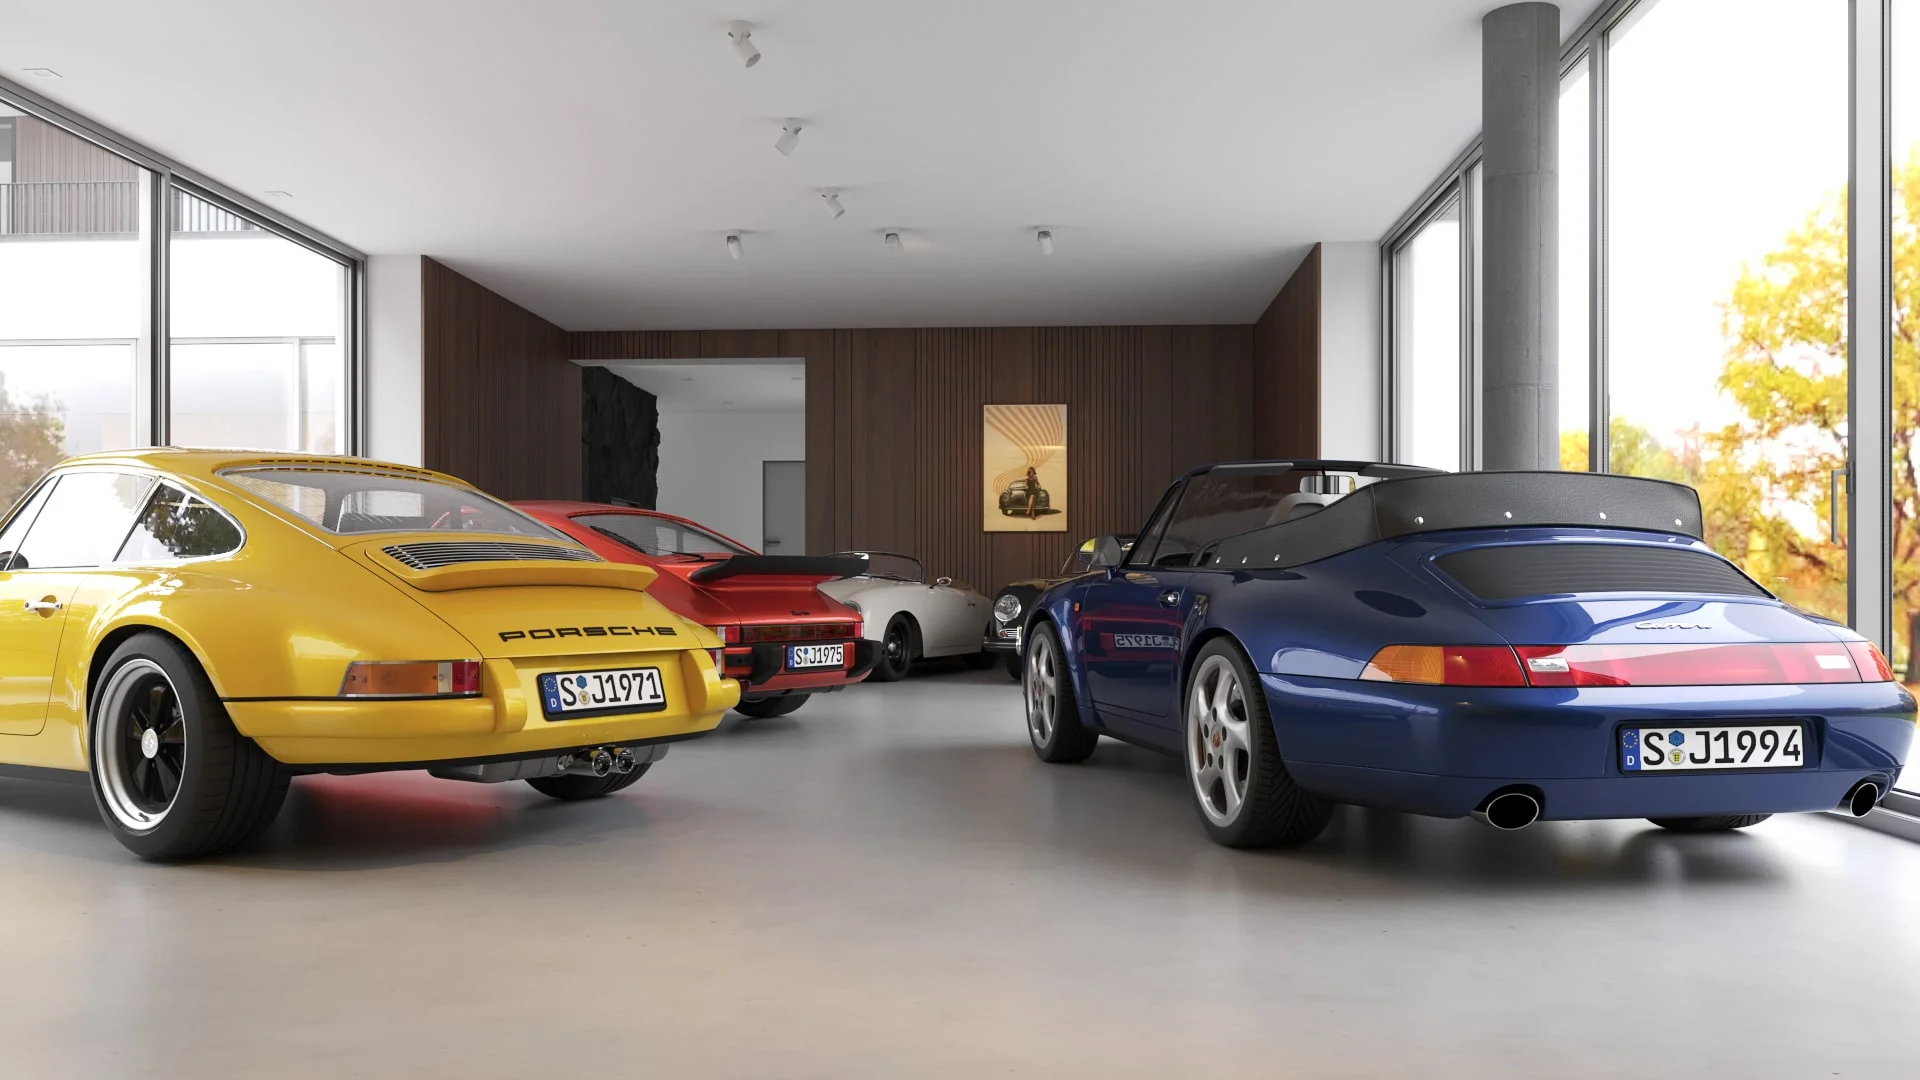 Architectural visualization. Single-family house with Porsche garage_14